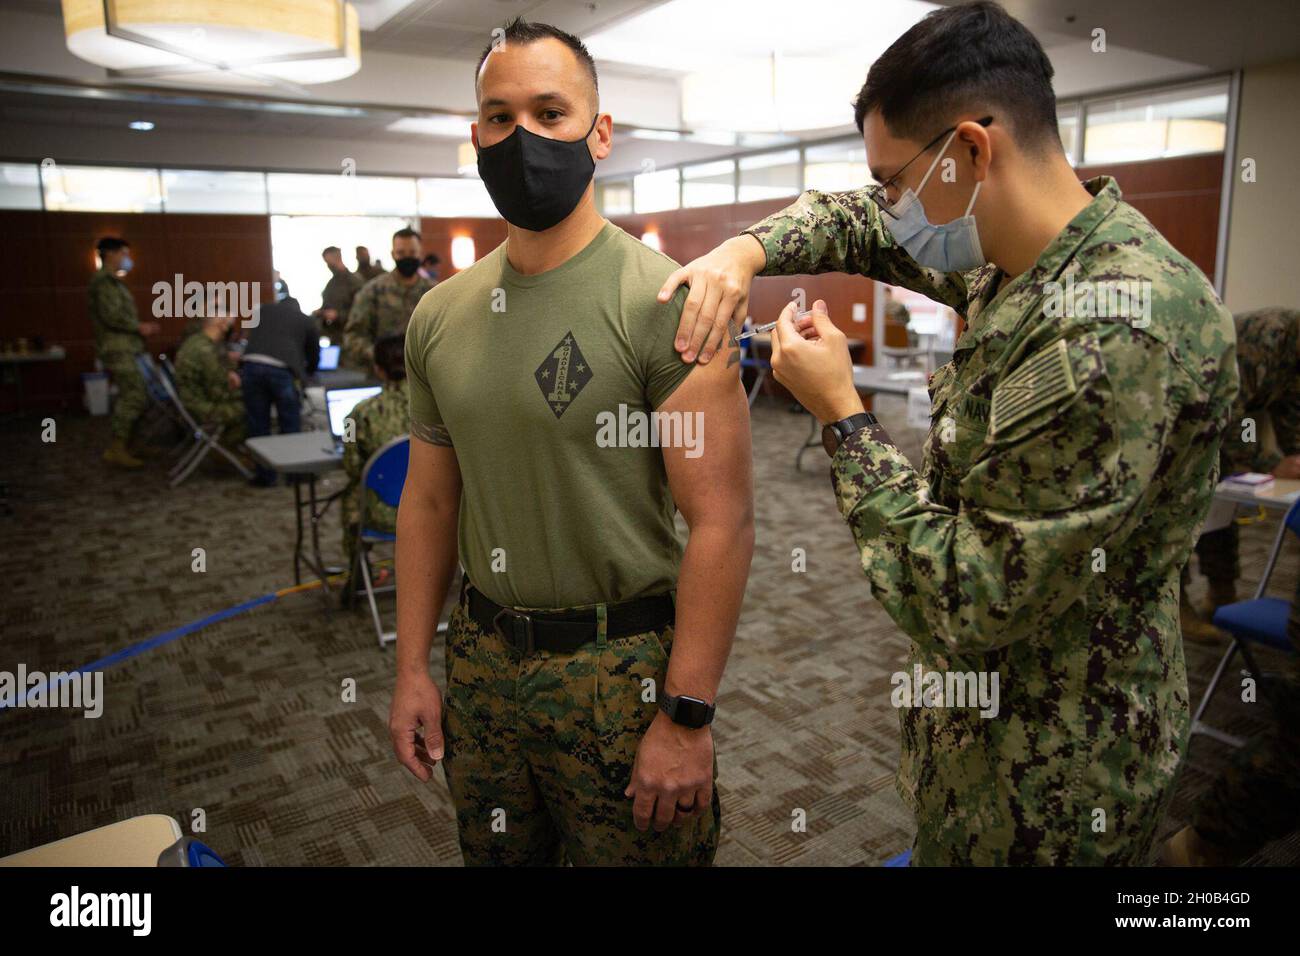 U.S. Marine Corps Col. Daniel Skuce, commanding officer for 11th Marine Regiment, 1st Marine Division, receives the COVID-19 vaccination on Marine Corps Base Camp Pendleton, California, Jan. 15, 2021. The vaccine will help protect service members against COVID-19 and maintain medical readiness throughout 1st Marine Division. Stock Photo